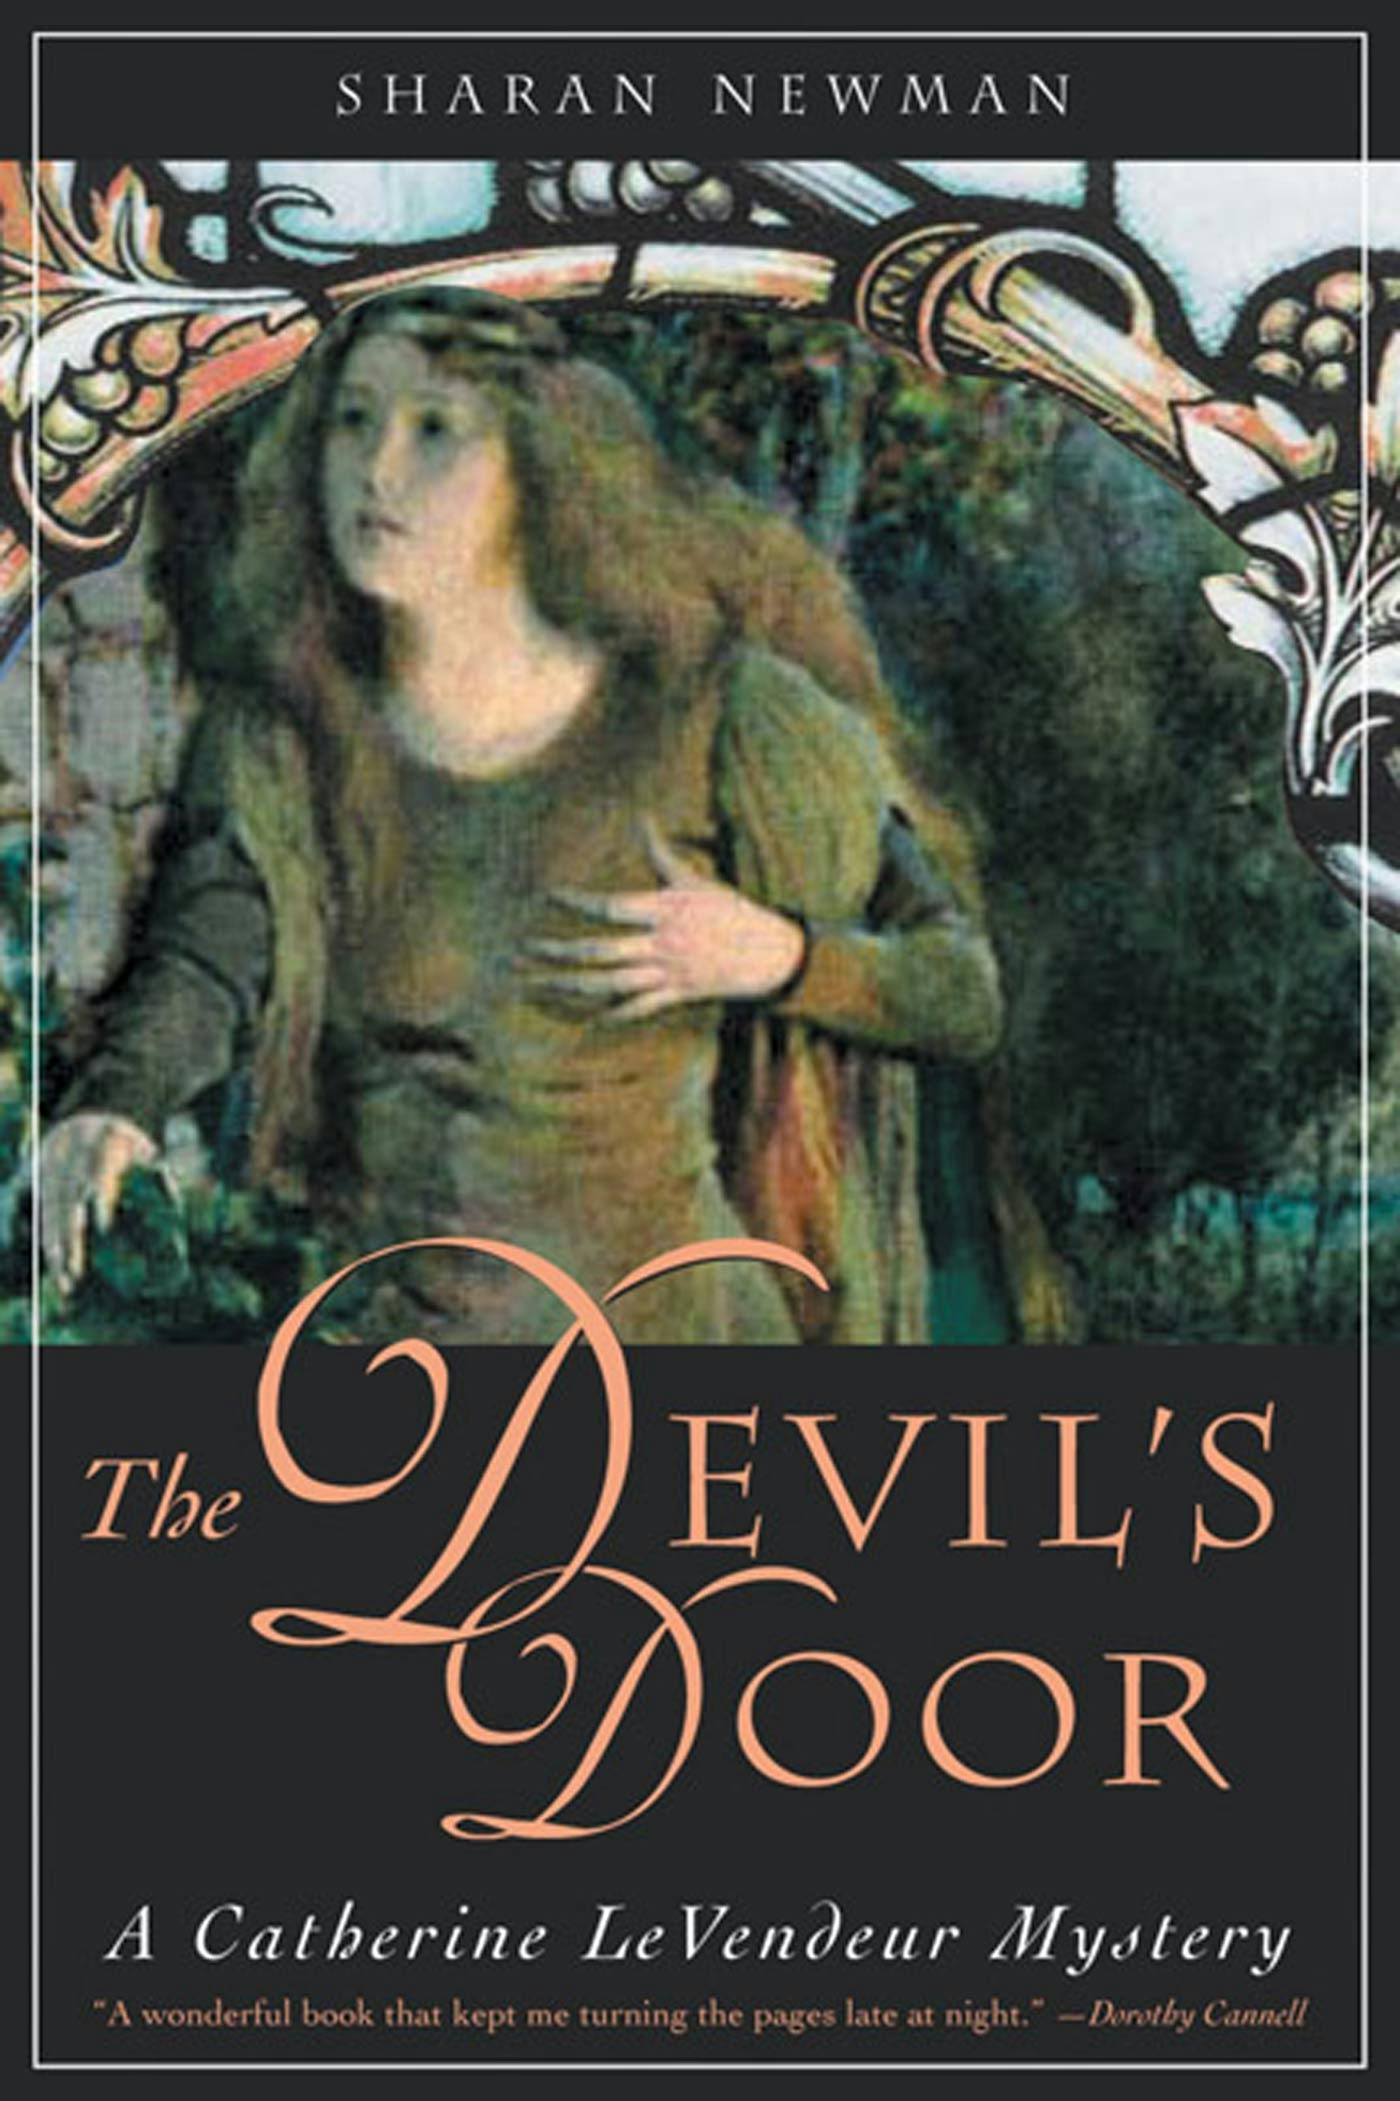 Cover for the book titled as: The Devil's Door